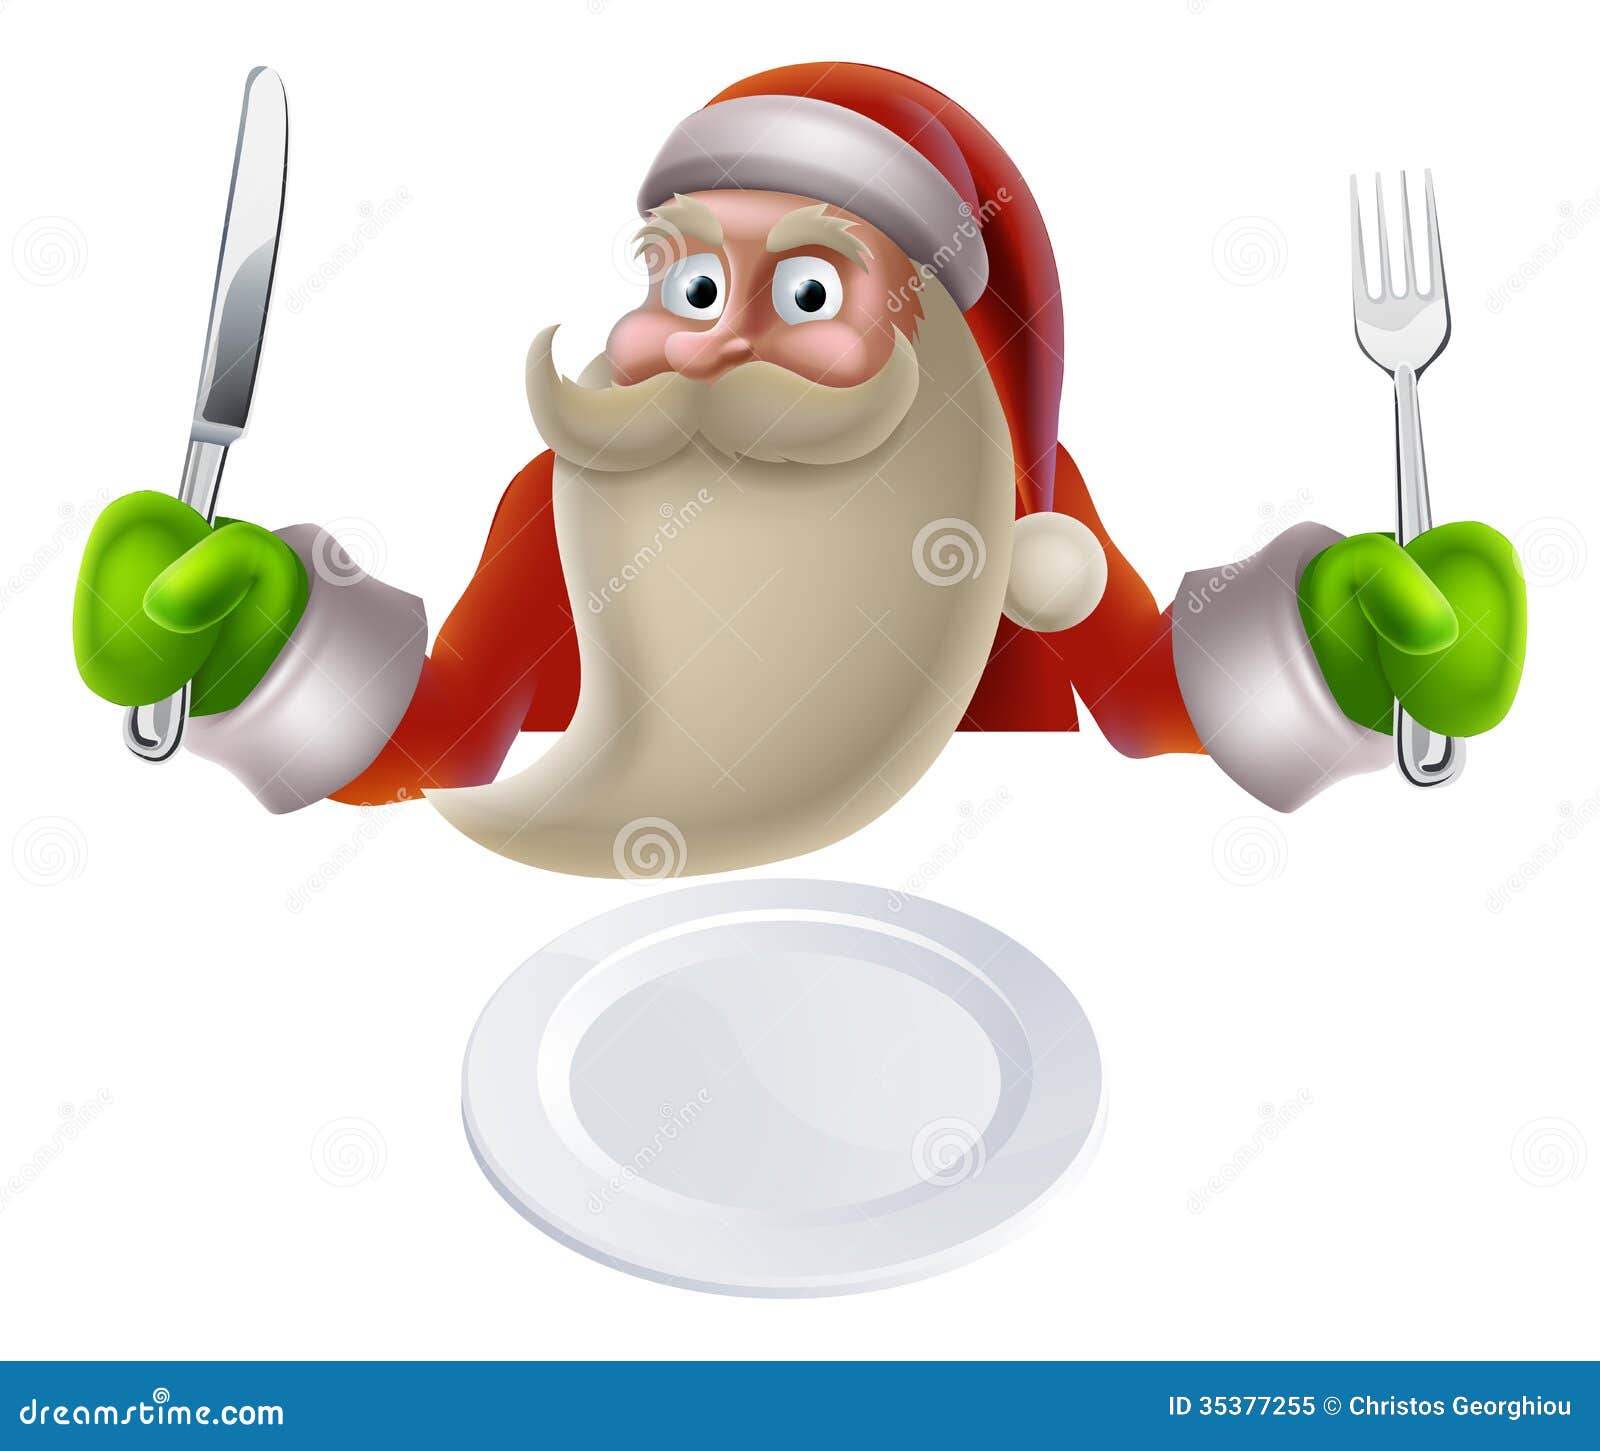 christmas meal clipart - photo #22